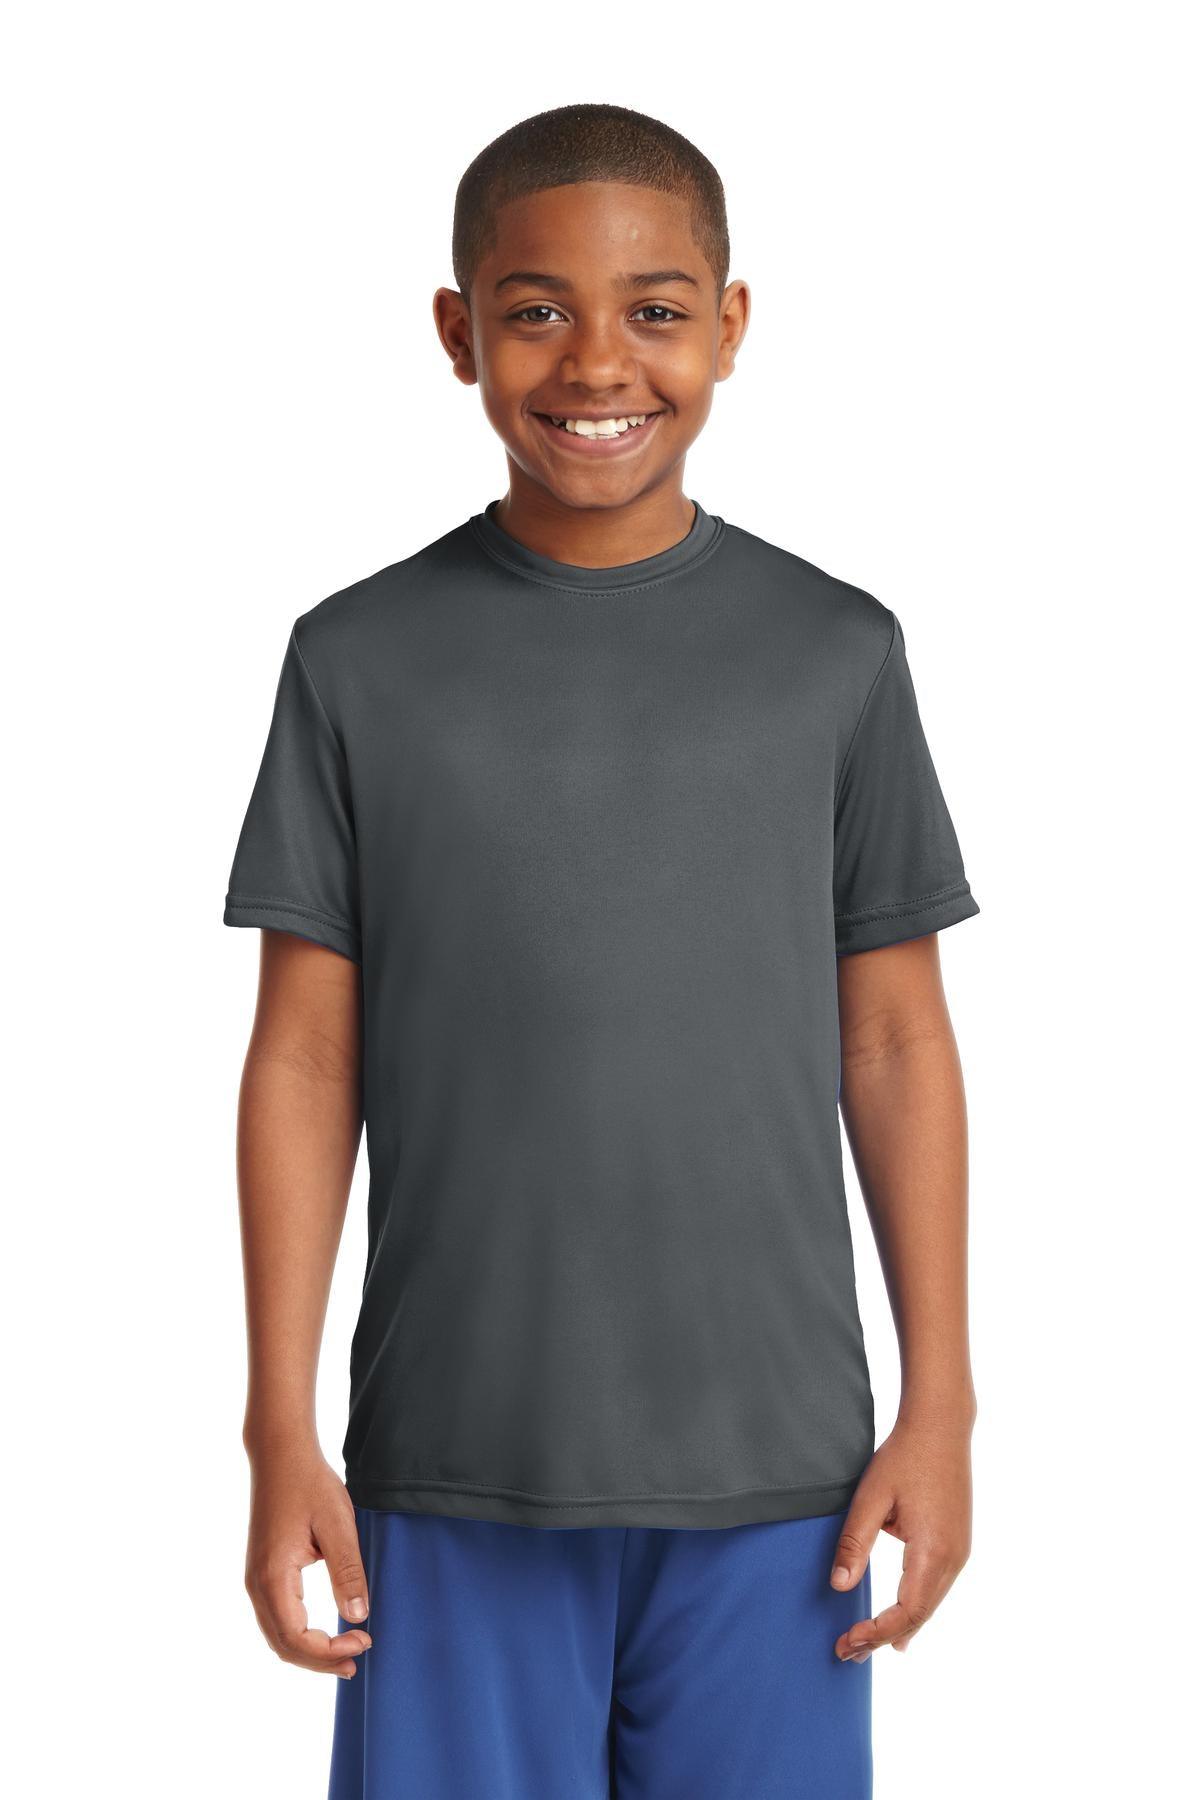 Sport-Tek Youth PosiCharge Competitor Tee. YST350 - Dresses Max